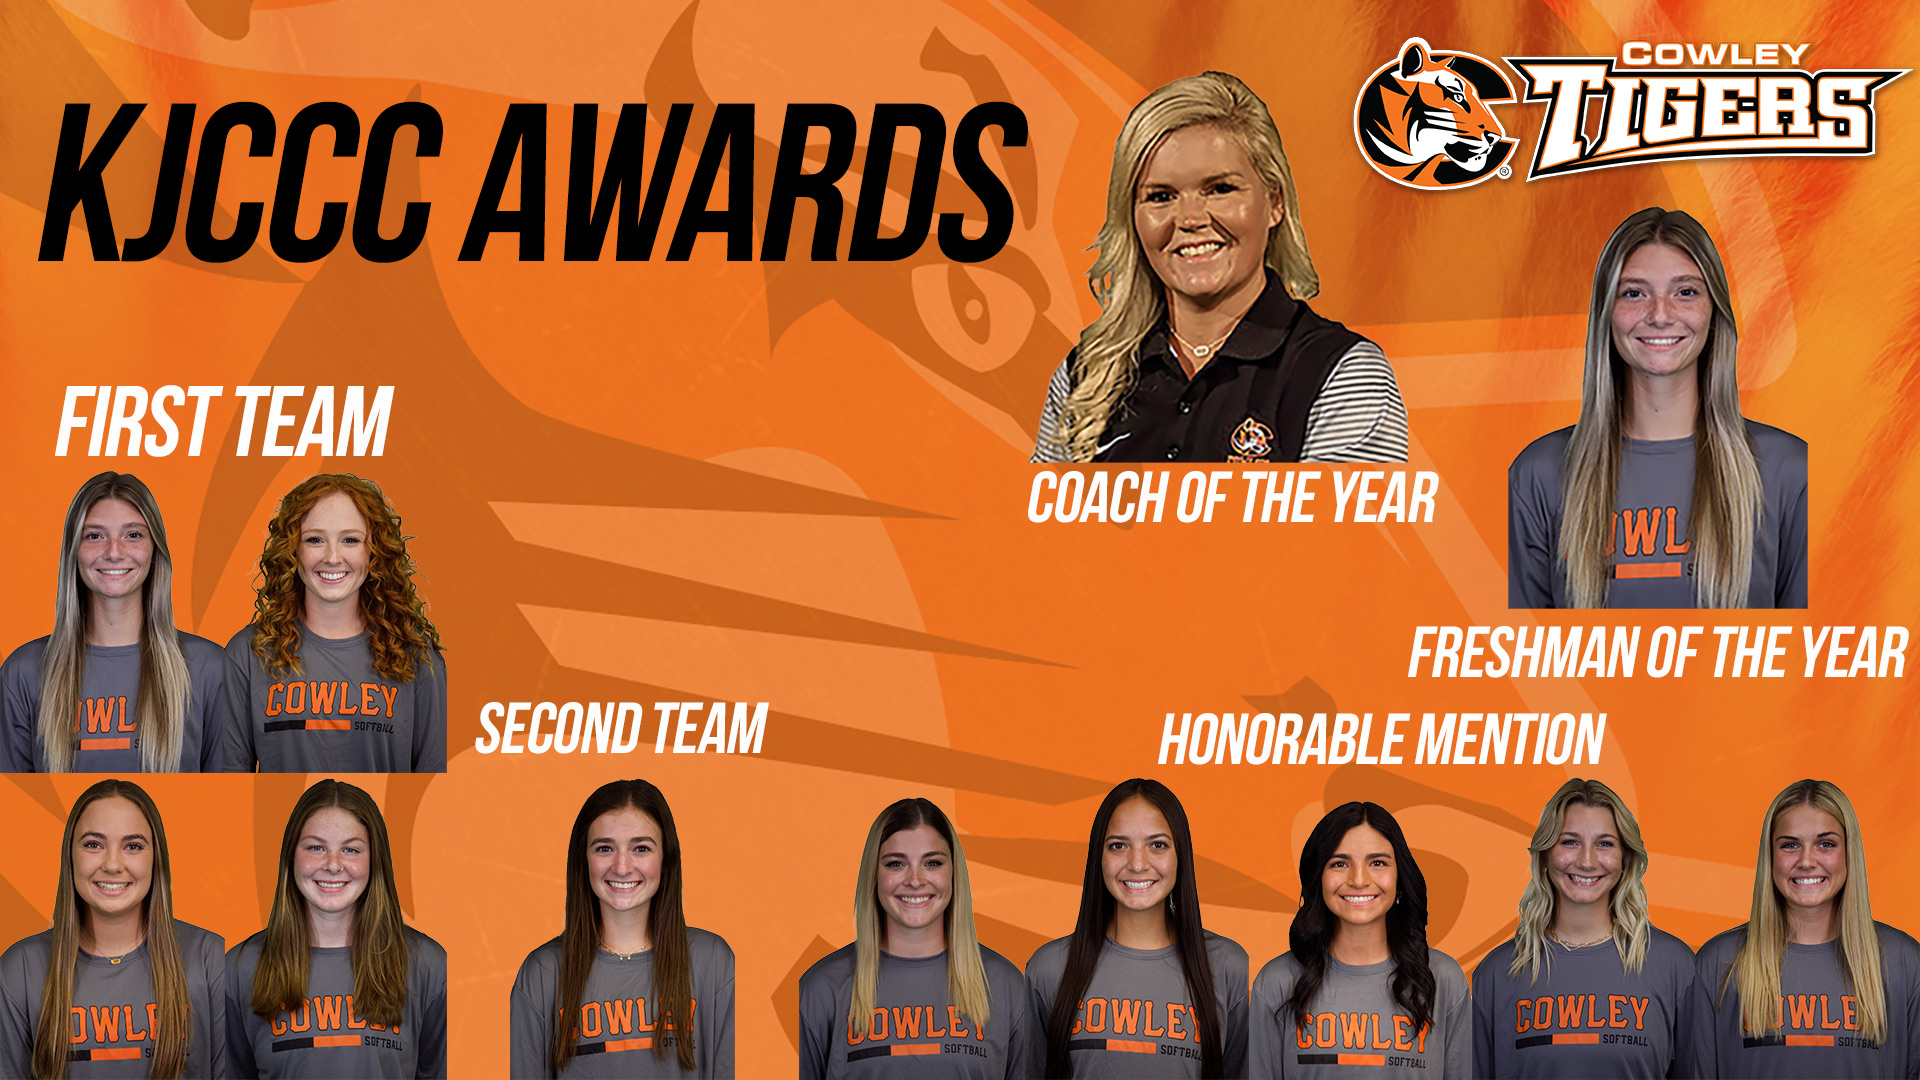 Hoyt named Coach of the Year, Smith Freshman of the Year